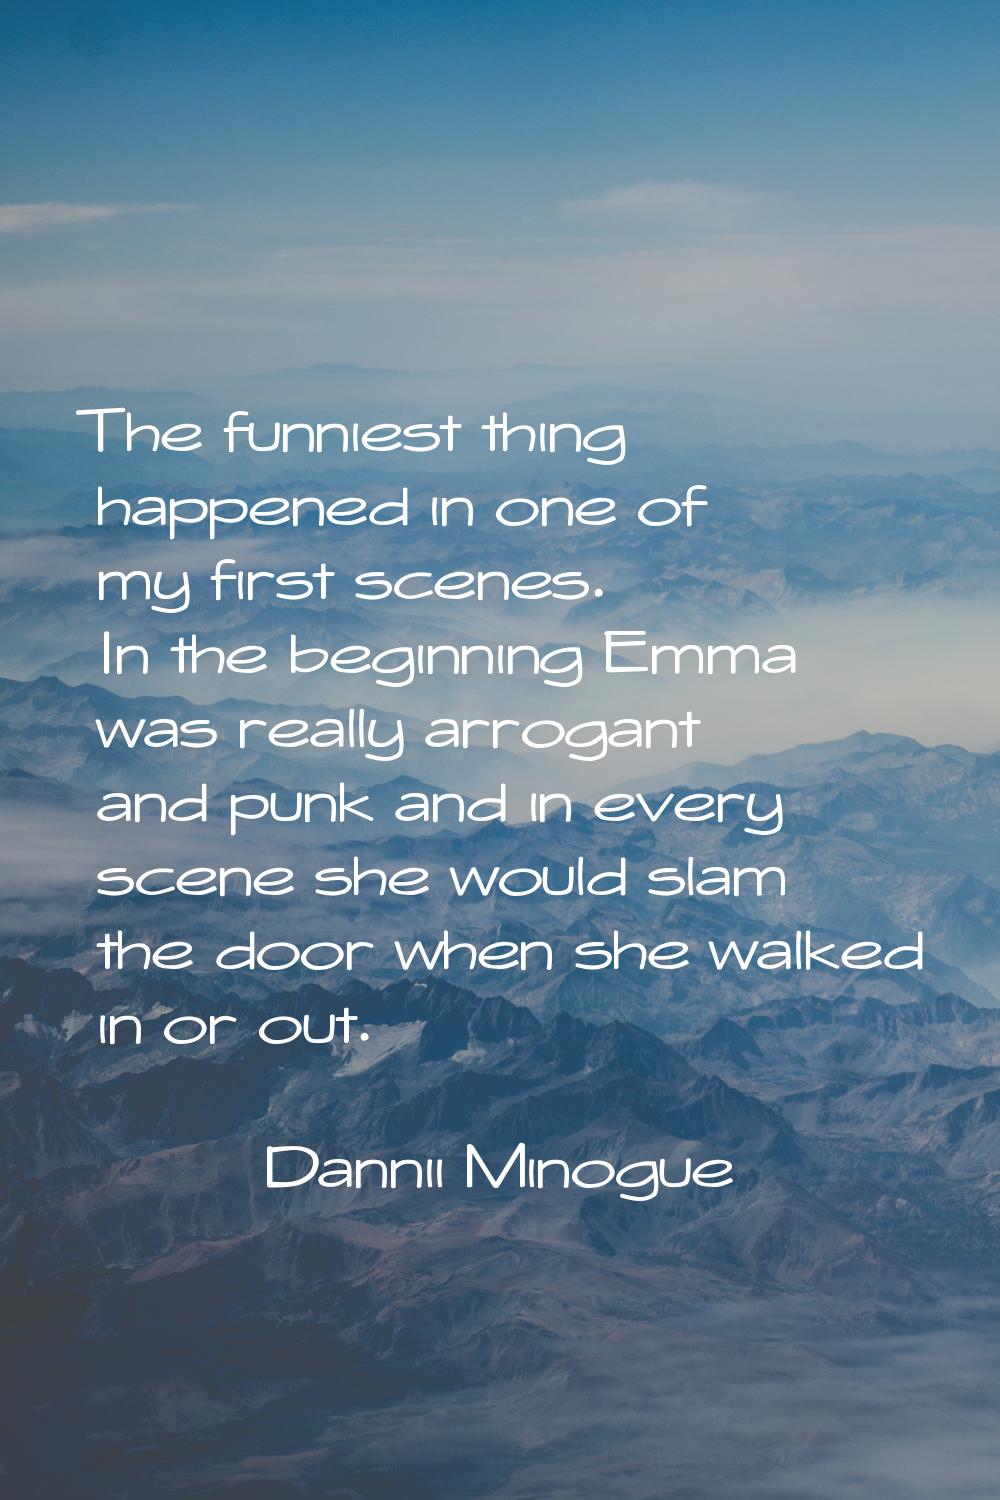 The funniest thing happened in one of my first scenes. In the beginning Emma was really arrogant an